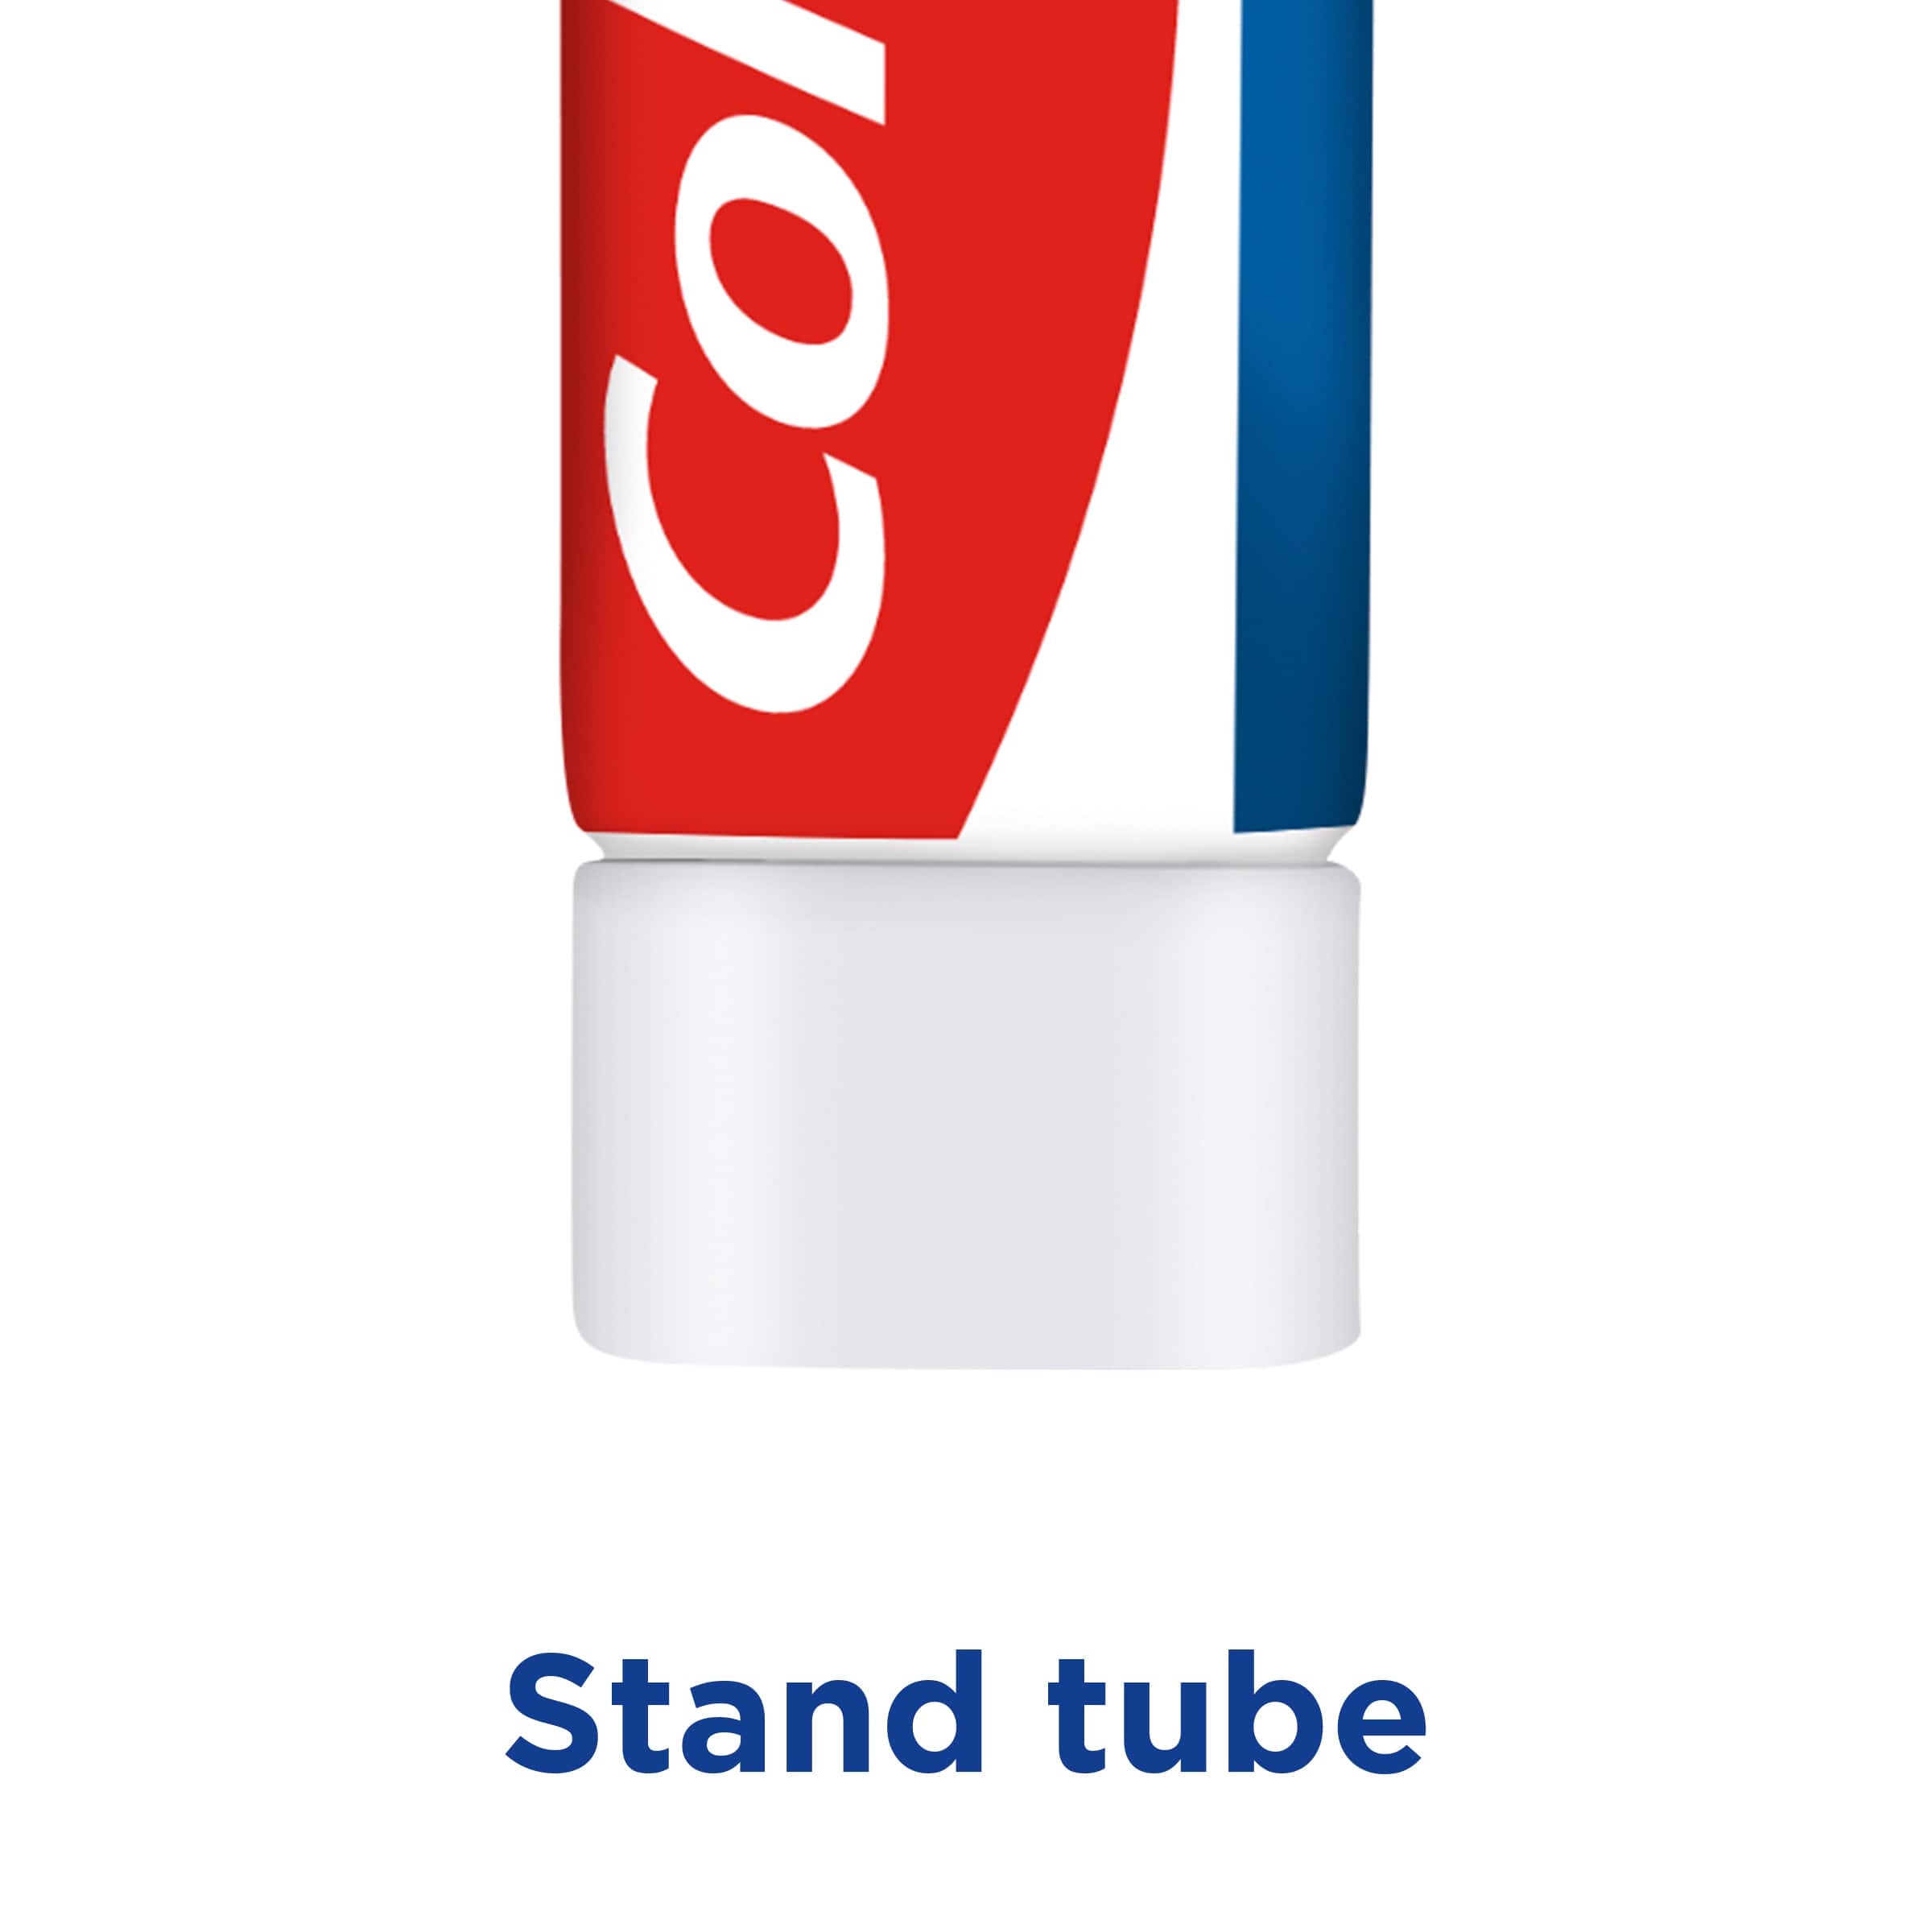 Stand tube